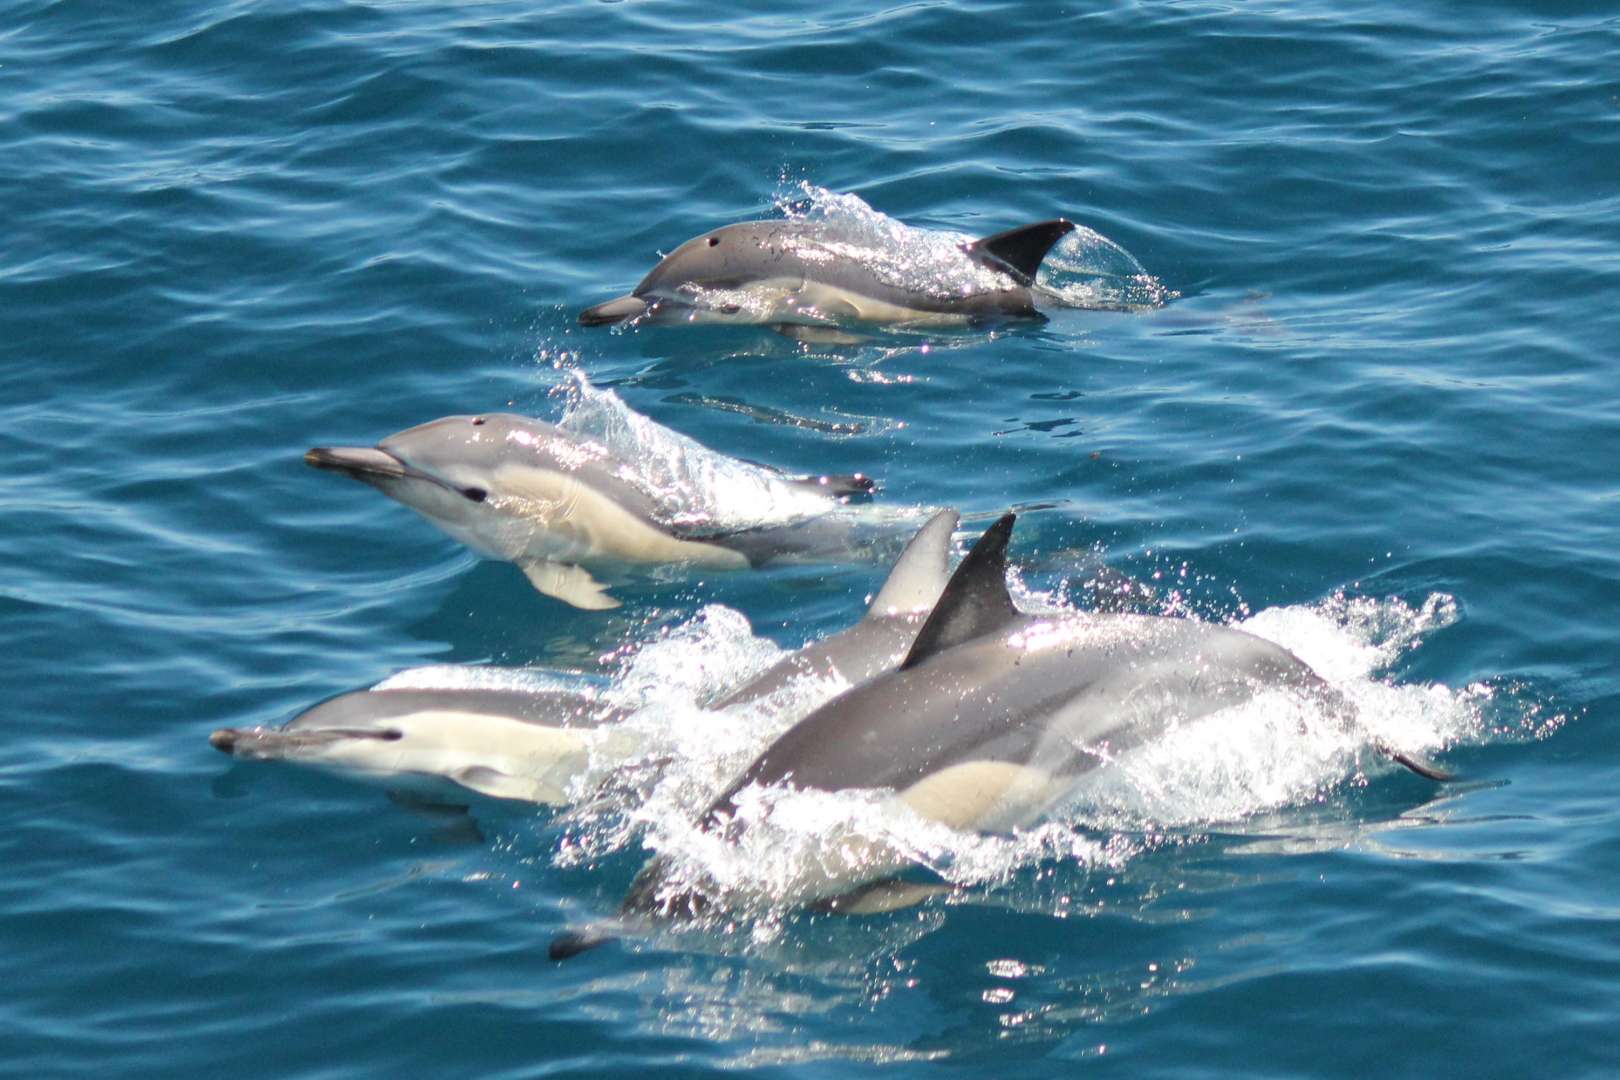 Doplphin viewing with Dolphin Eco Cruise